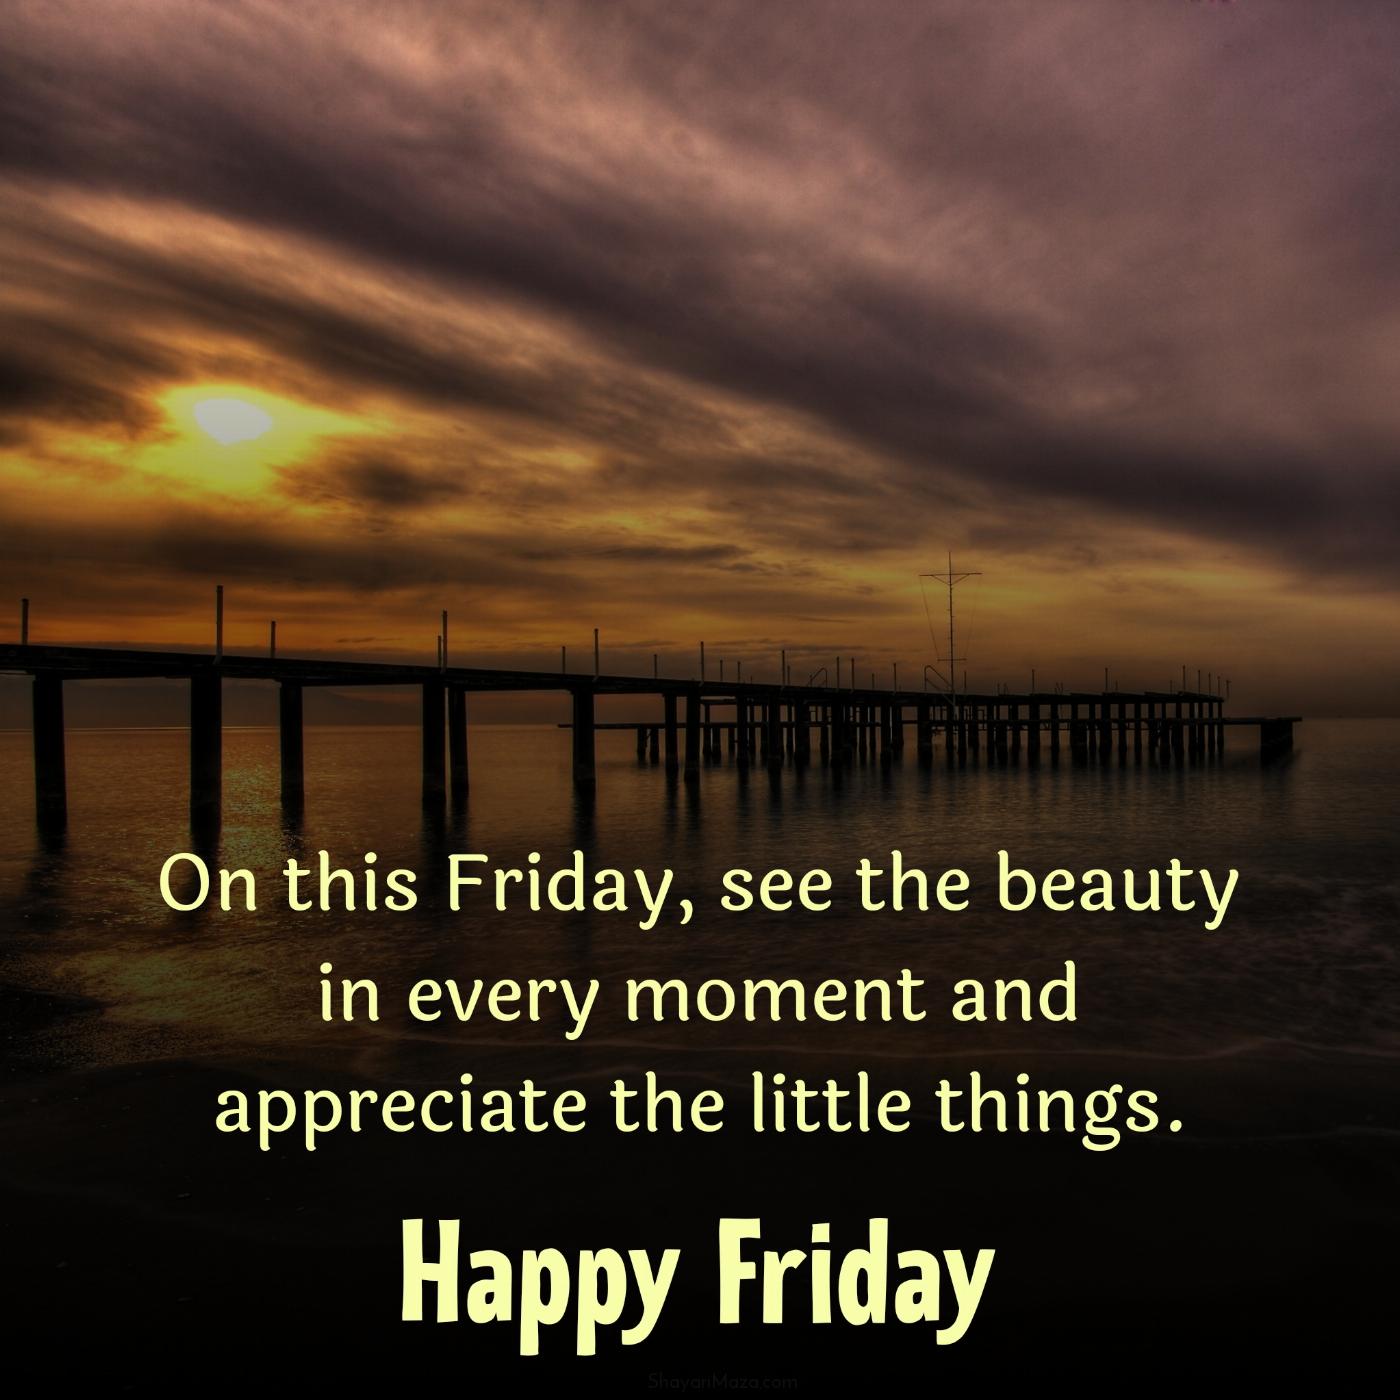 On this Friday see the beauty in every moment and appreciate